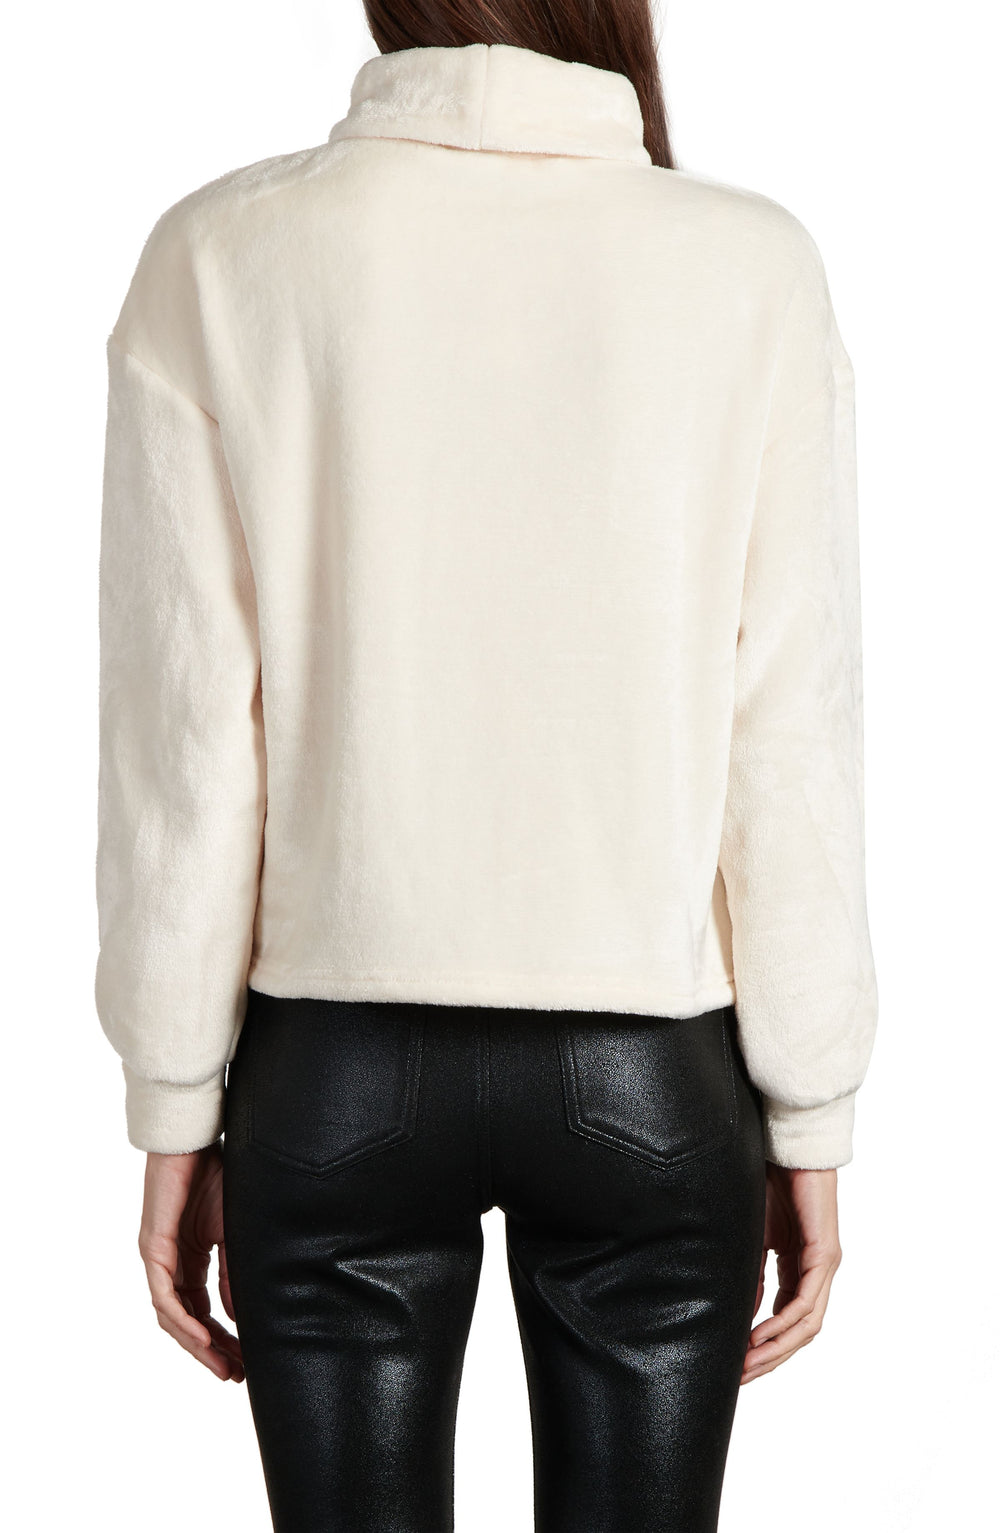 SOFTIE POPOVER SWEATER - Kingfisher Road - Online Boutique